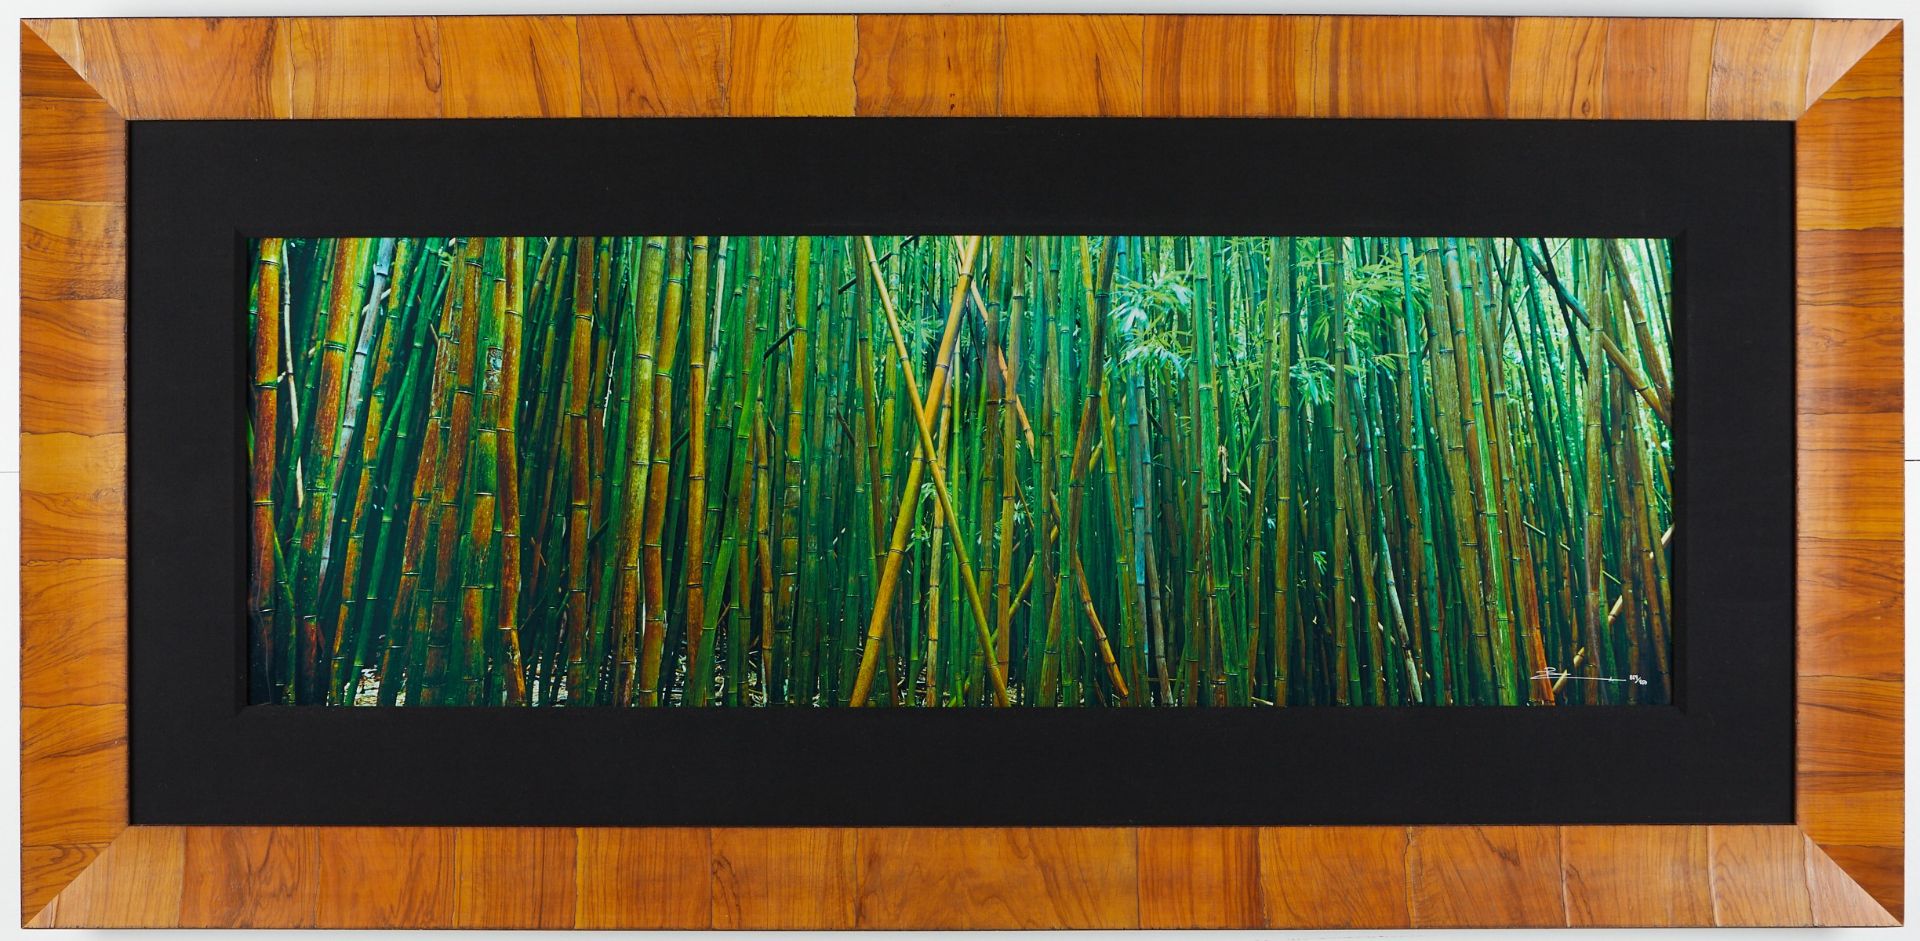 Peter Lik "Bamboo" Limited Edition Photograph - Image 2 of 3